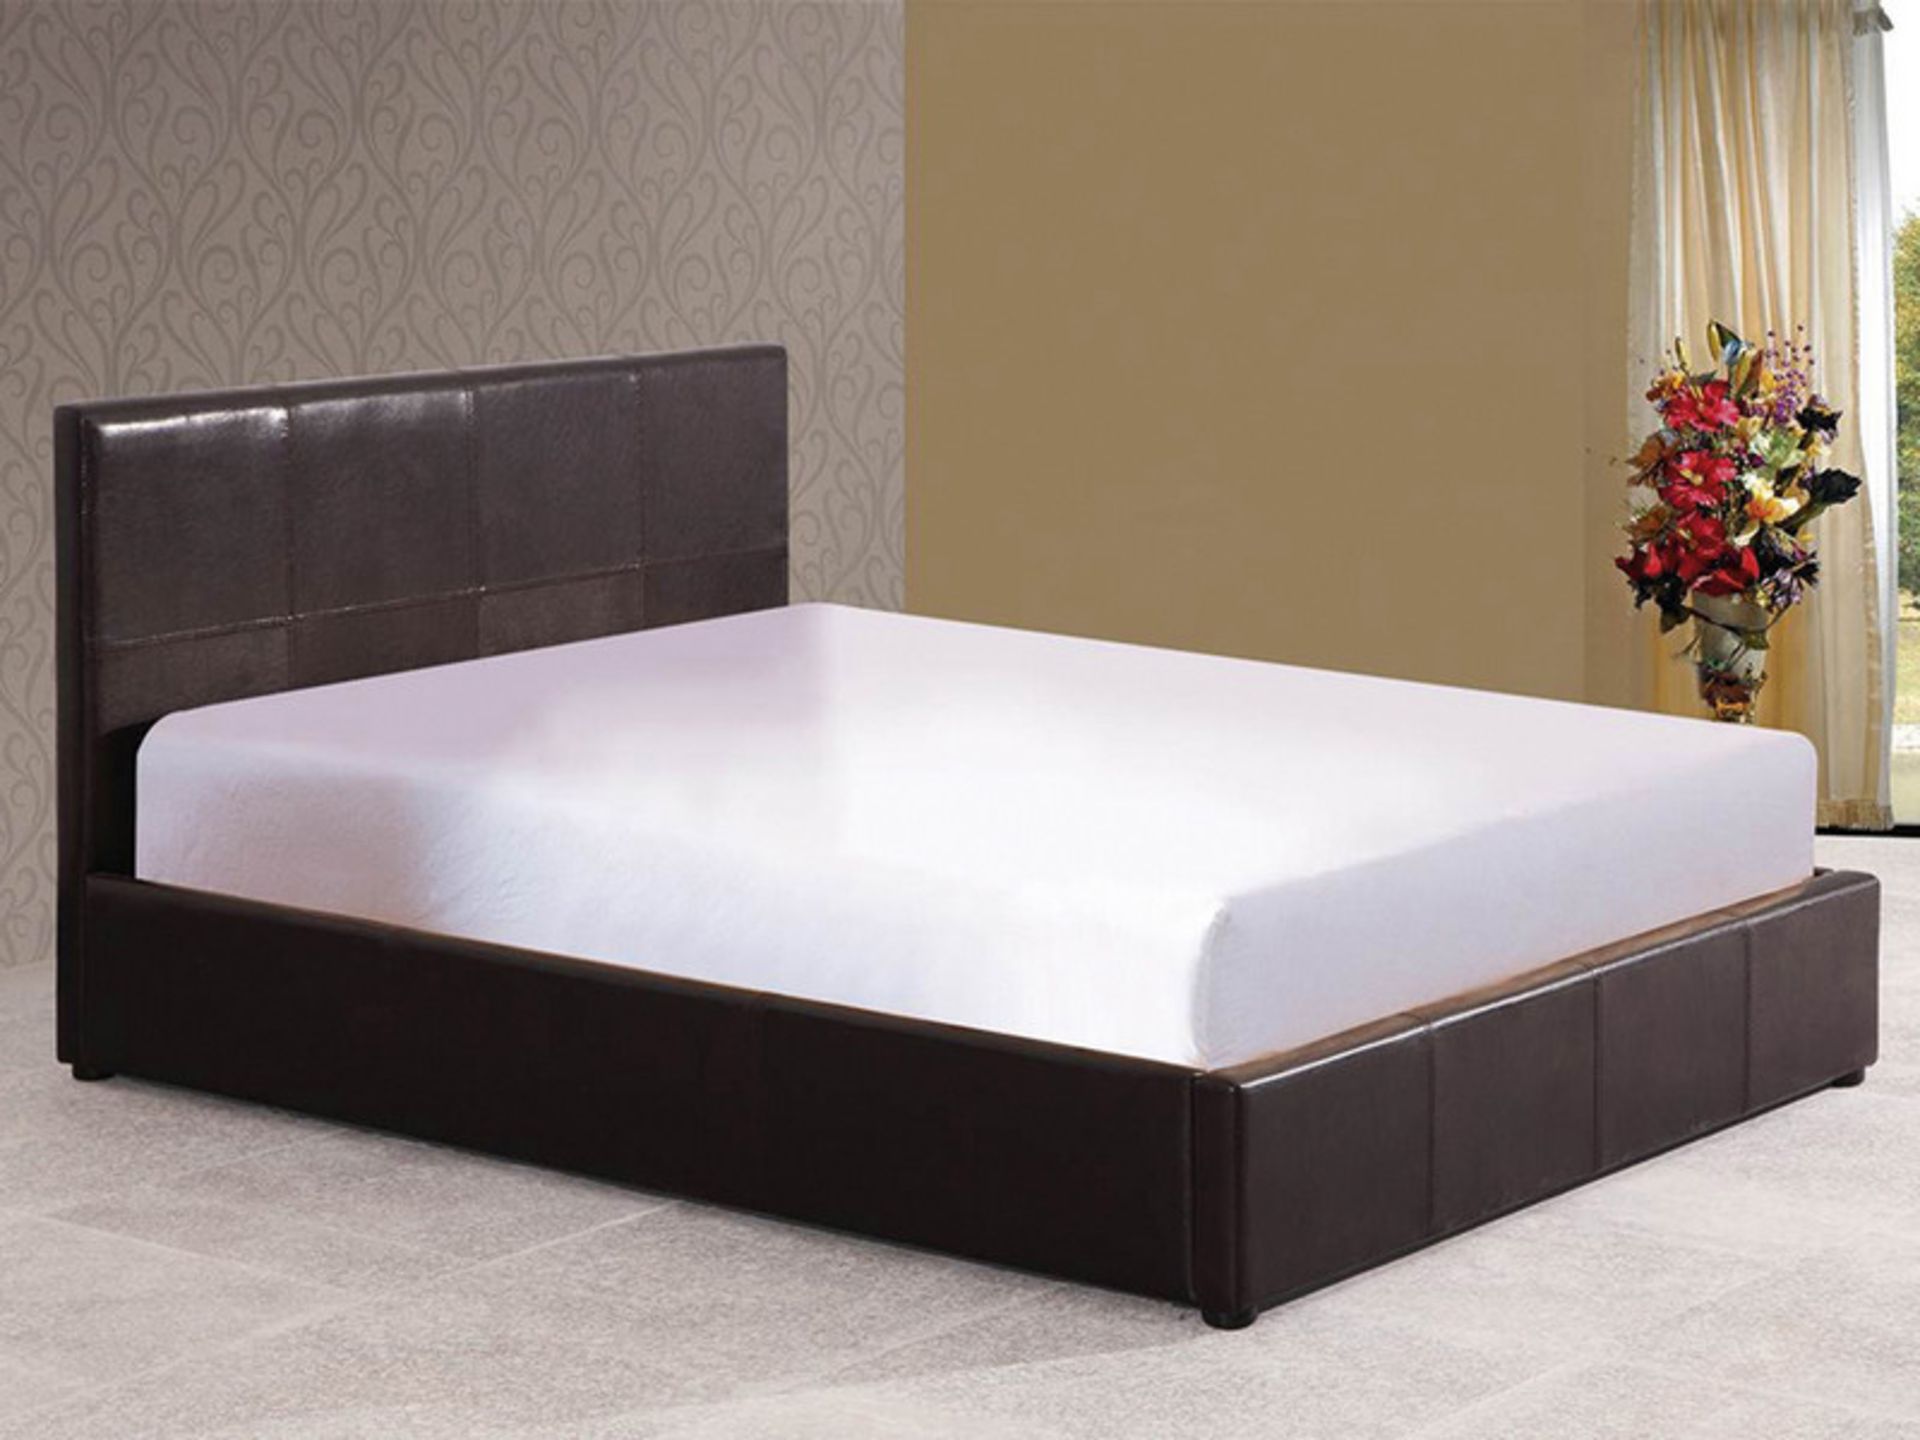 MICHIGAN 4'6" DOUUBLE OTTOMAN BED BROWN